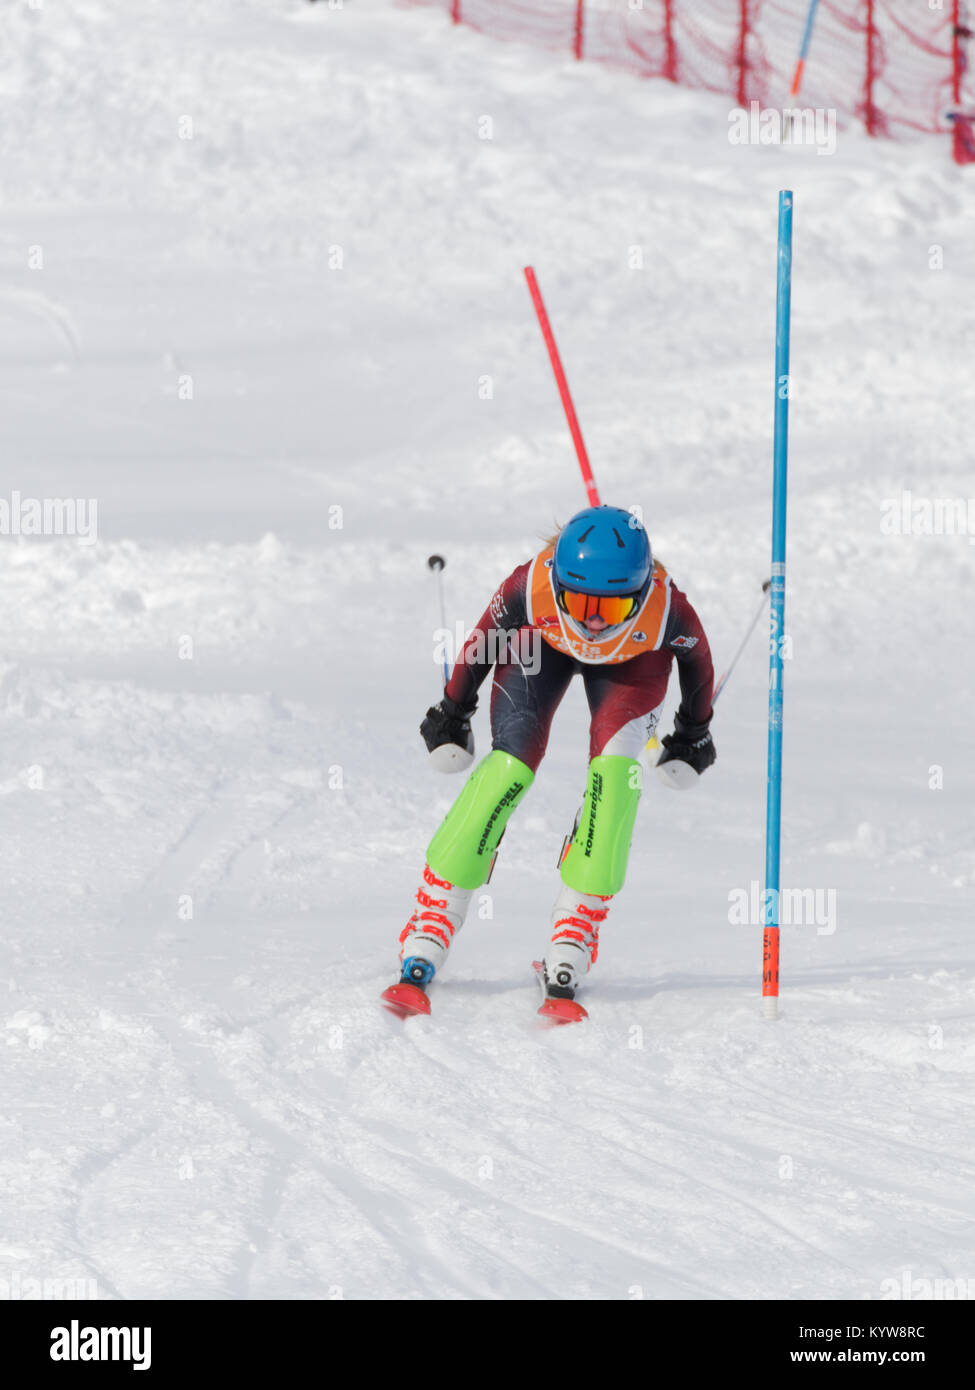 Val Saint-Come,Canada 1/13/2018.Sara Tessier of Canada forthe Saint-Sauveur ski club competes  at the Super Serie Sports Experts women's slalom event Stock Photo